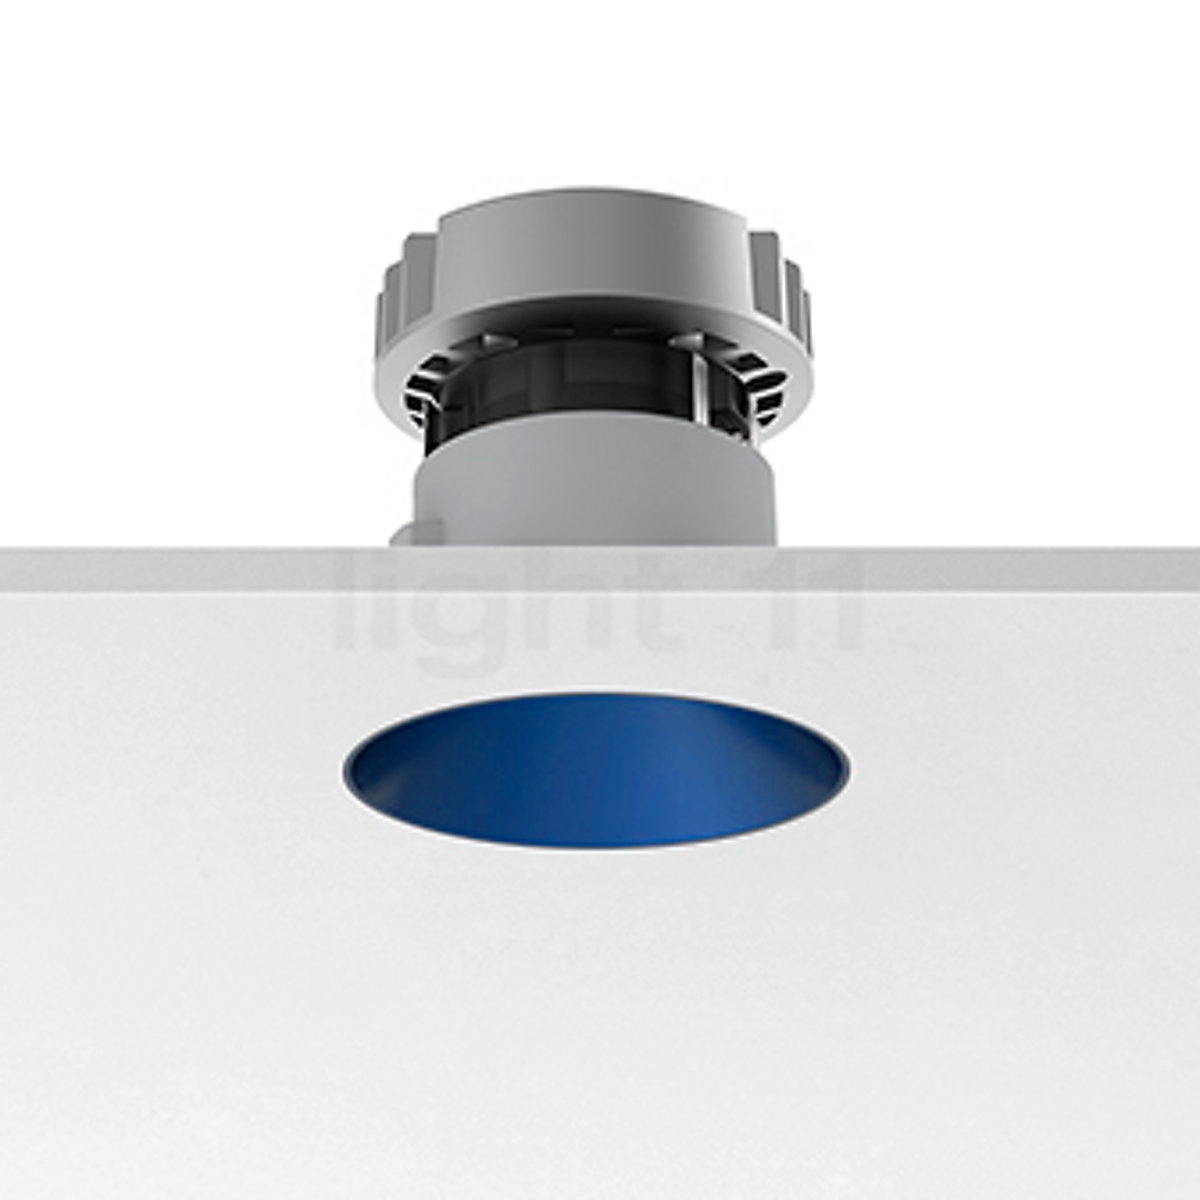 Buy Flos Architectural Kap 80 Recessed Ceiling Light Round Led At